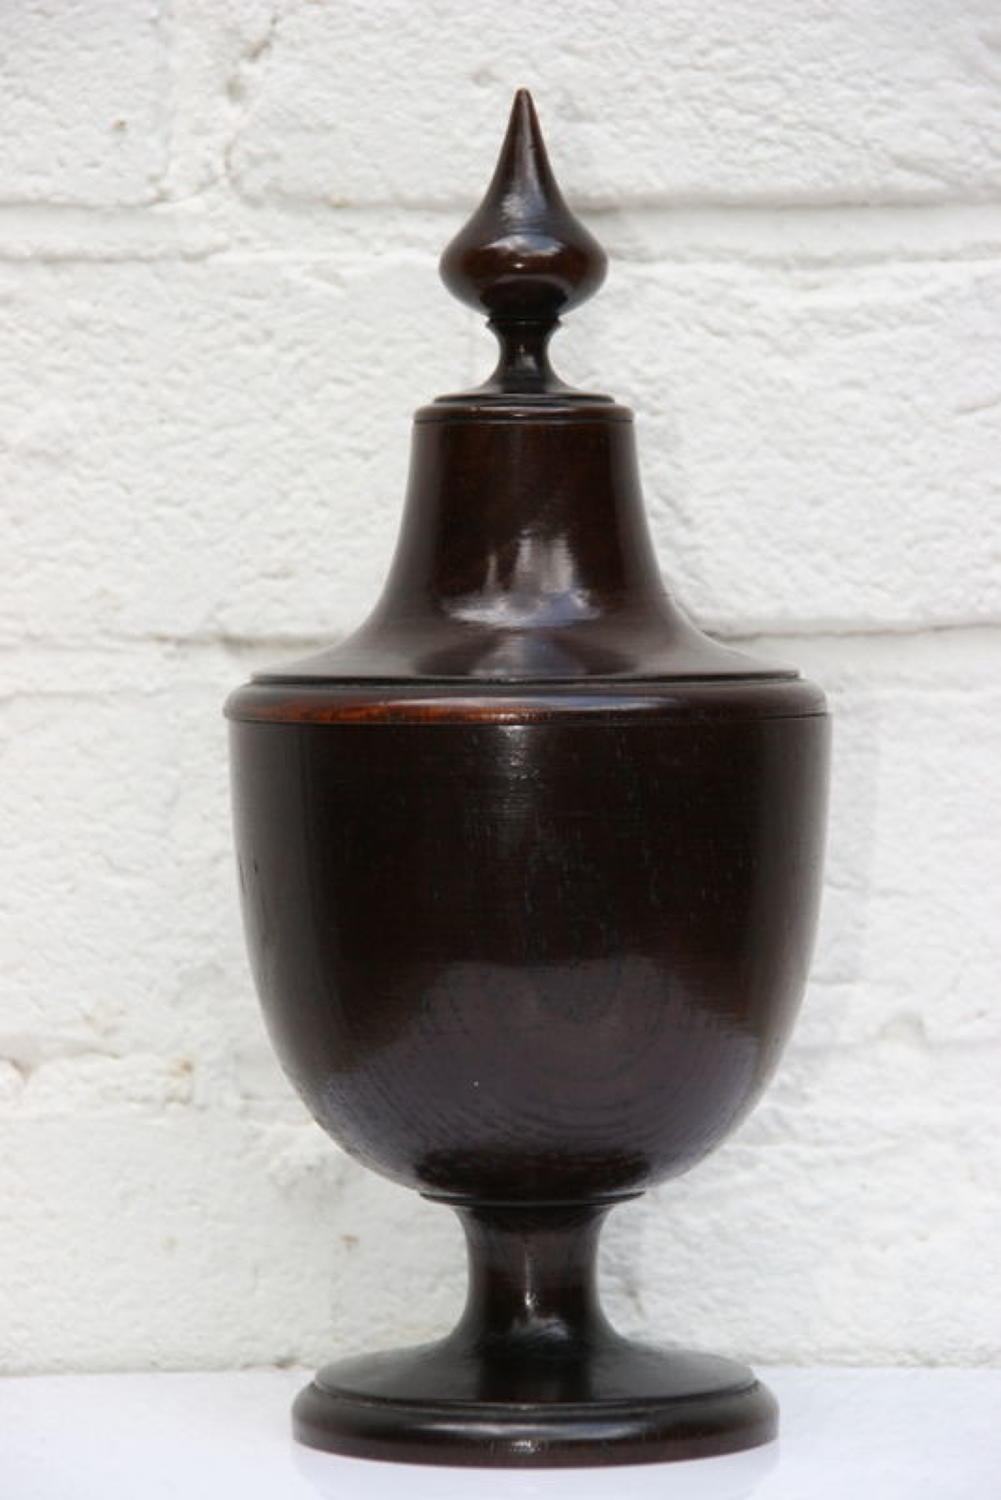 Treen Cup and Cover c.1800